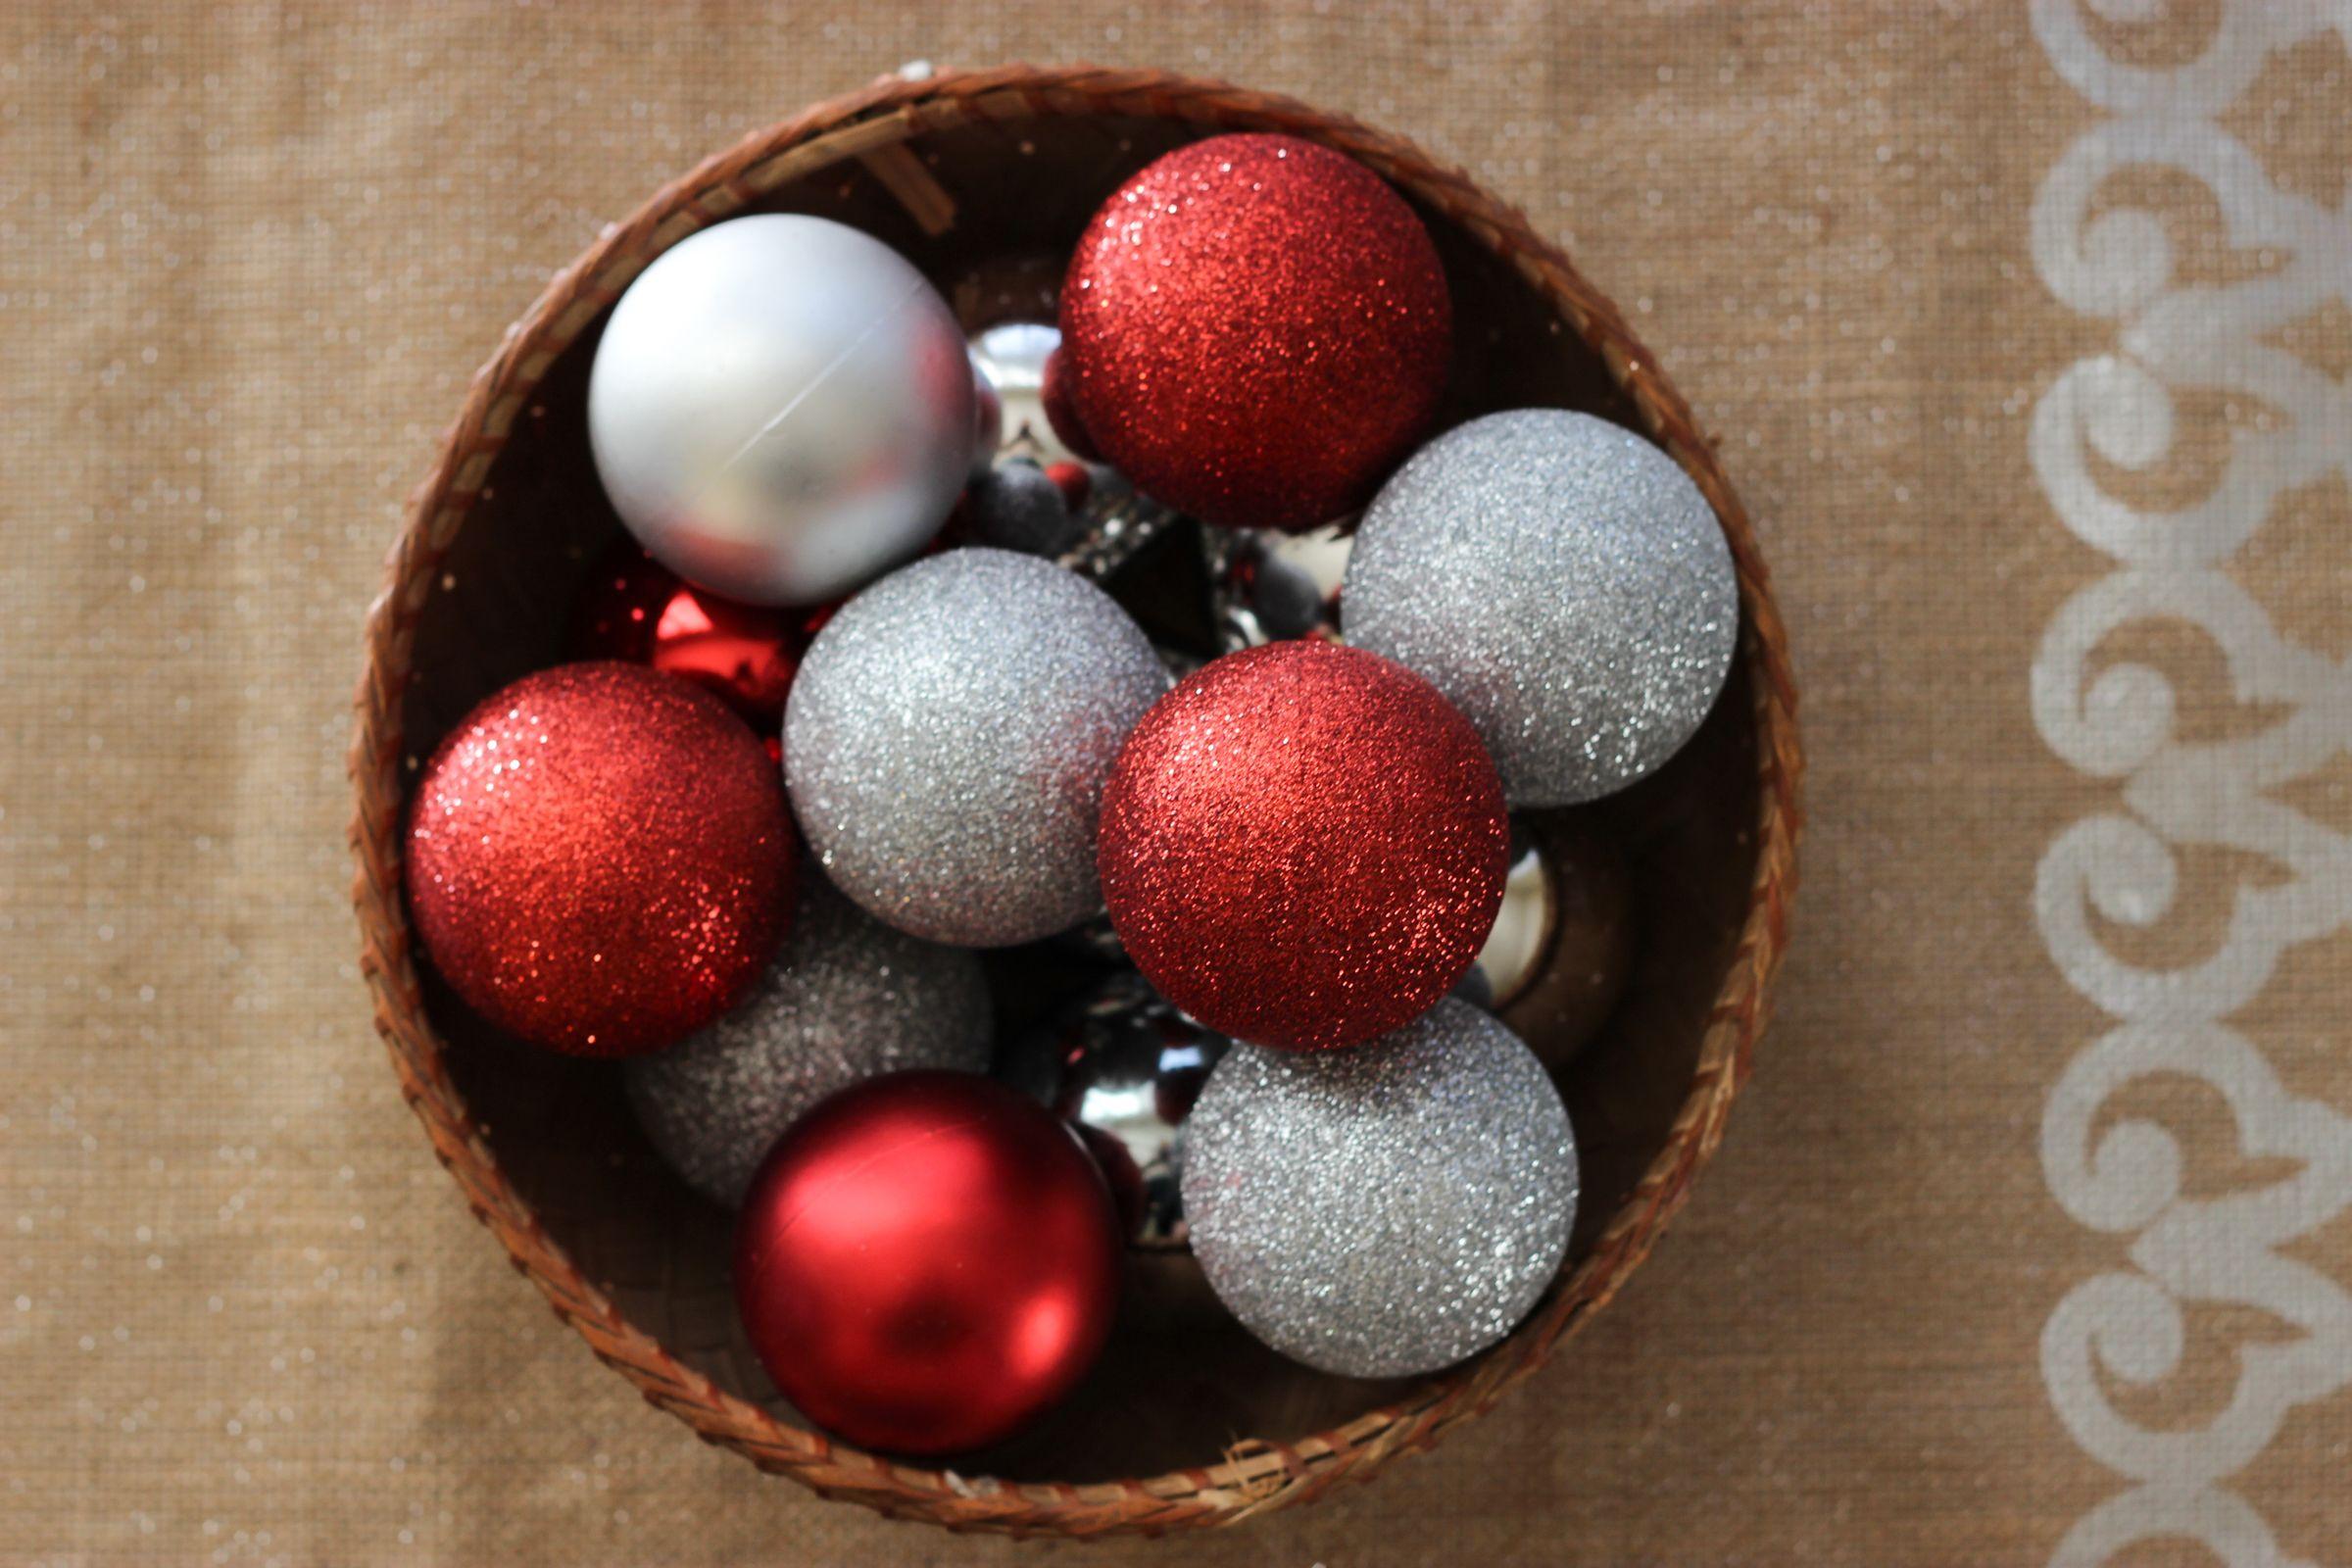 Red and Silver Ball Logo - Free Stock Photo of Red & Silver Ball Ornaments in Basket